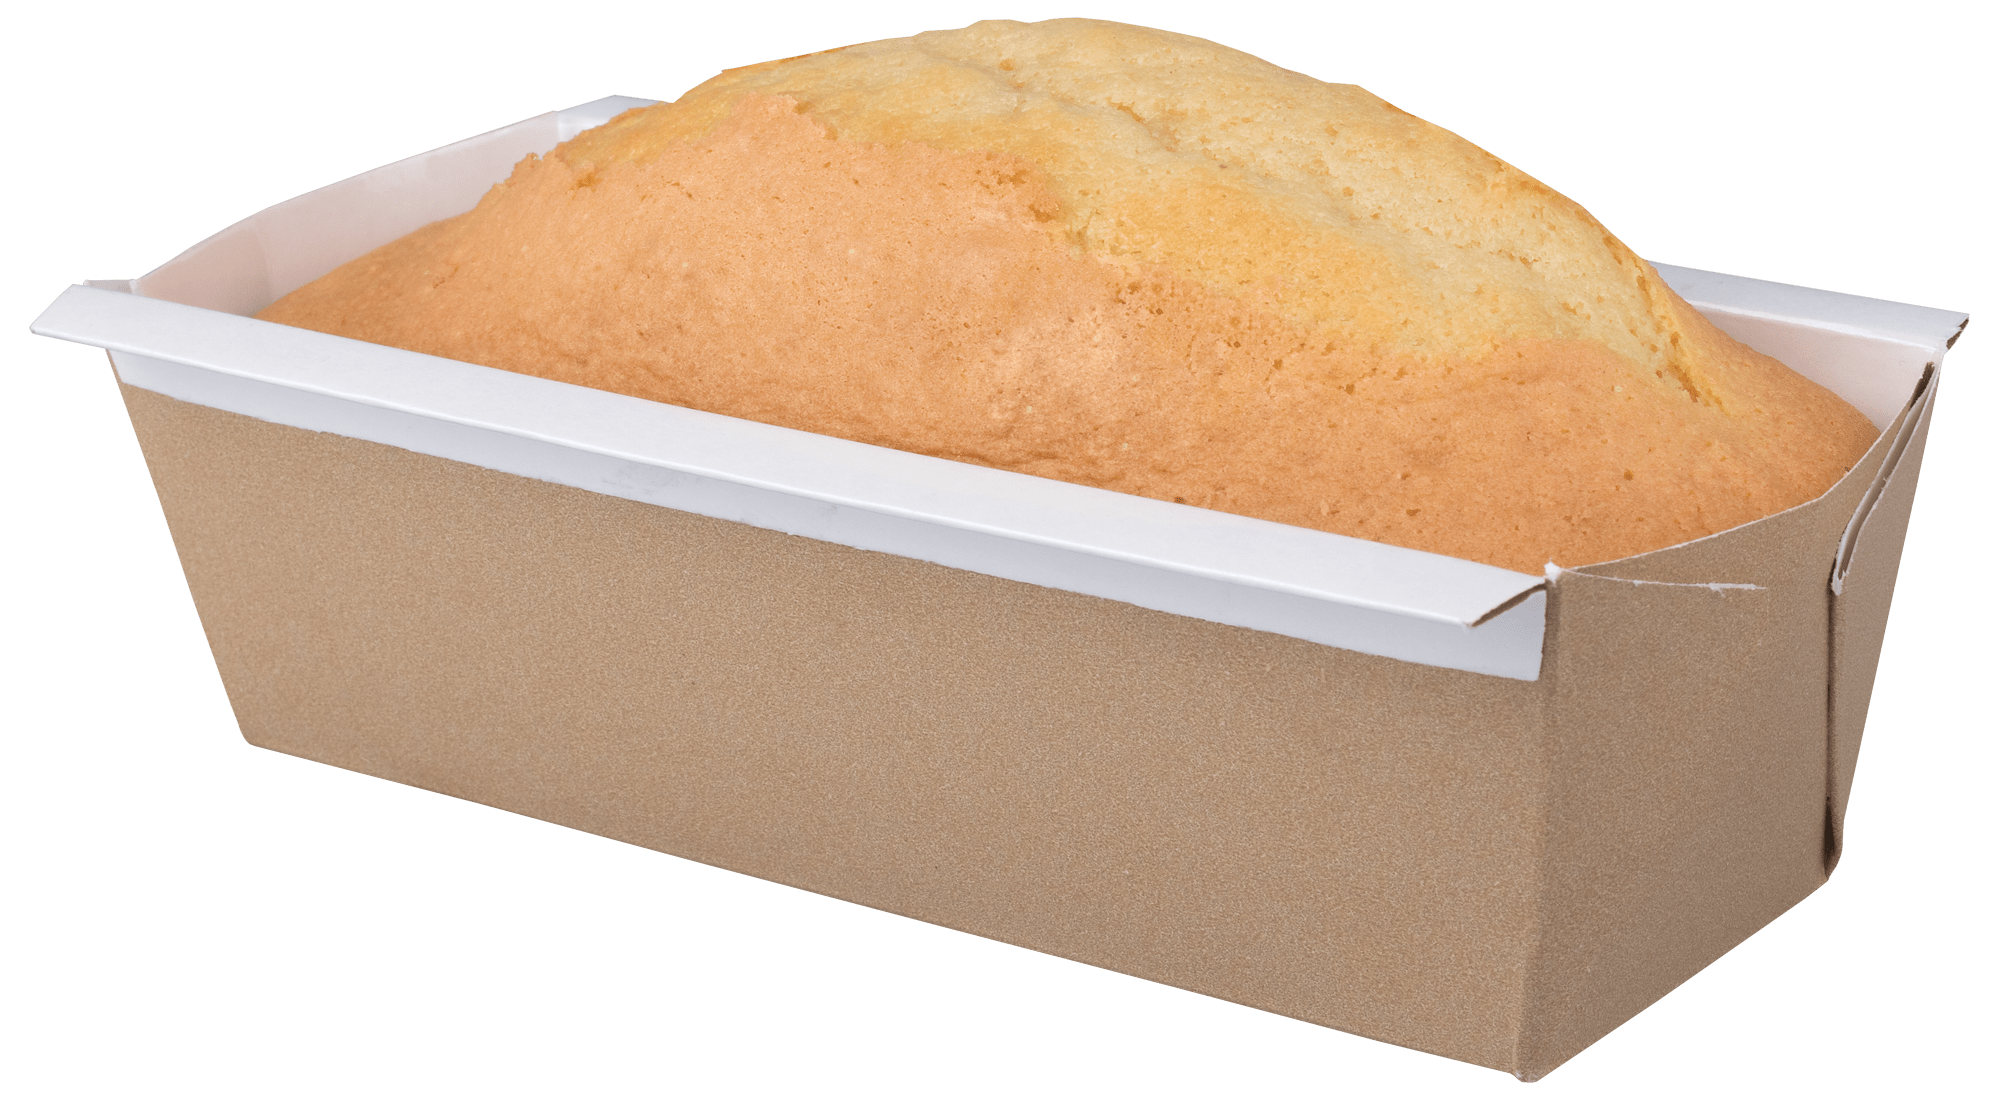 XL-baking moulds with edge reinforcement, Nature